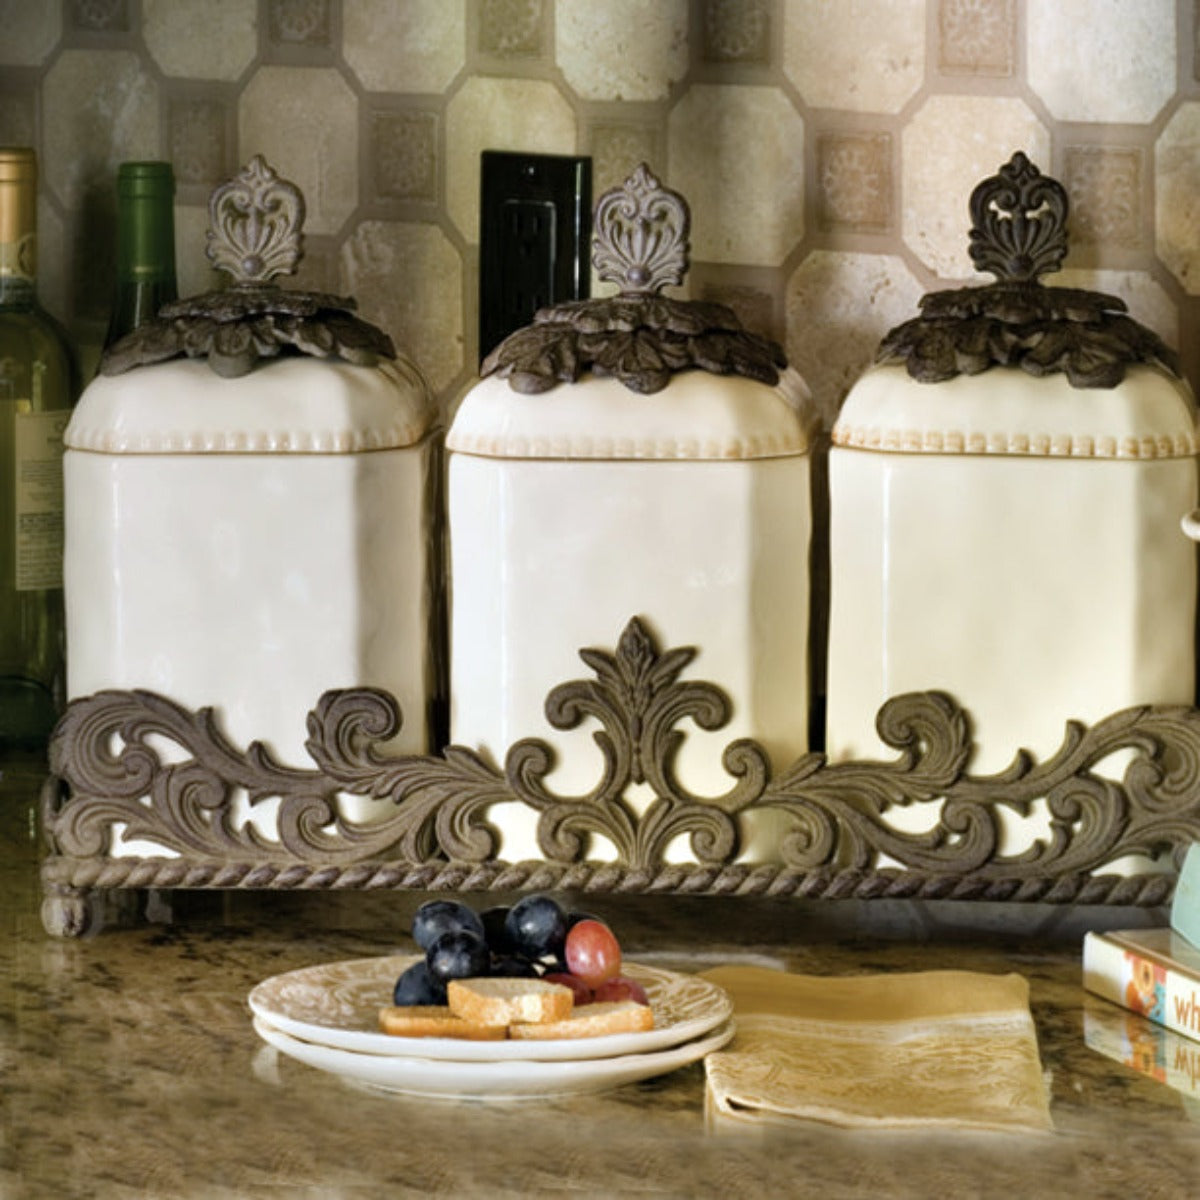 GG Collection Canisters and Kitchen Accessories - Iron Accents